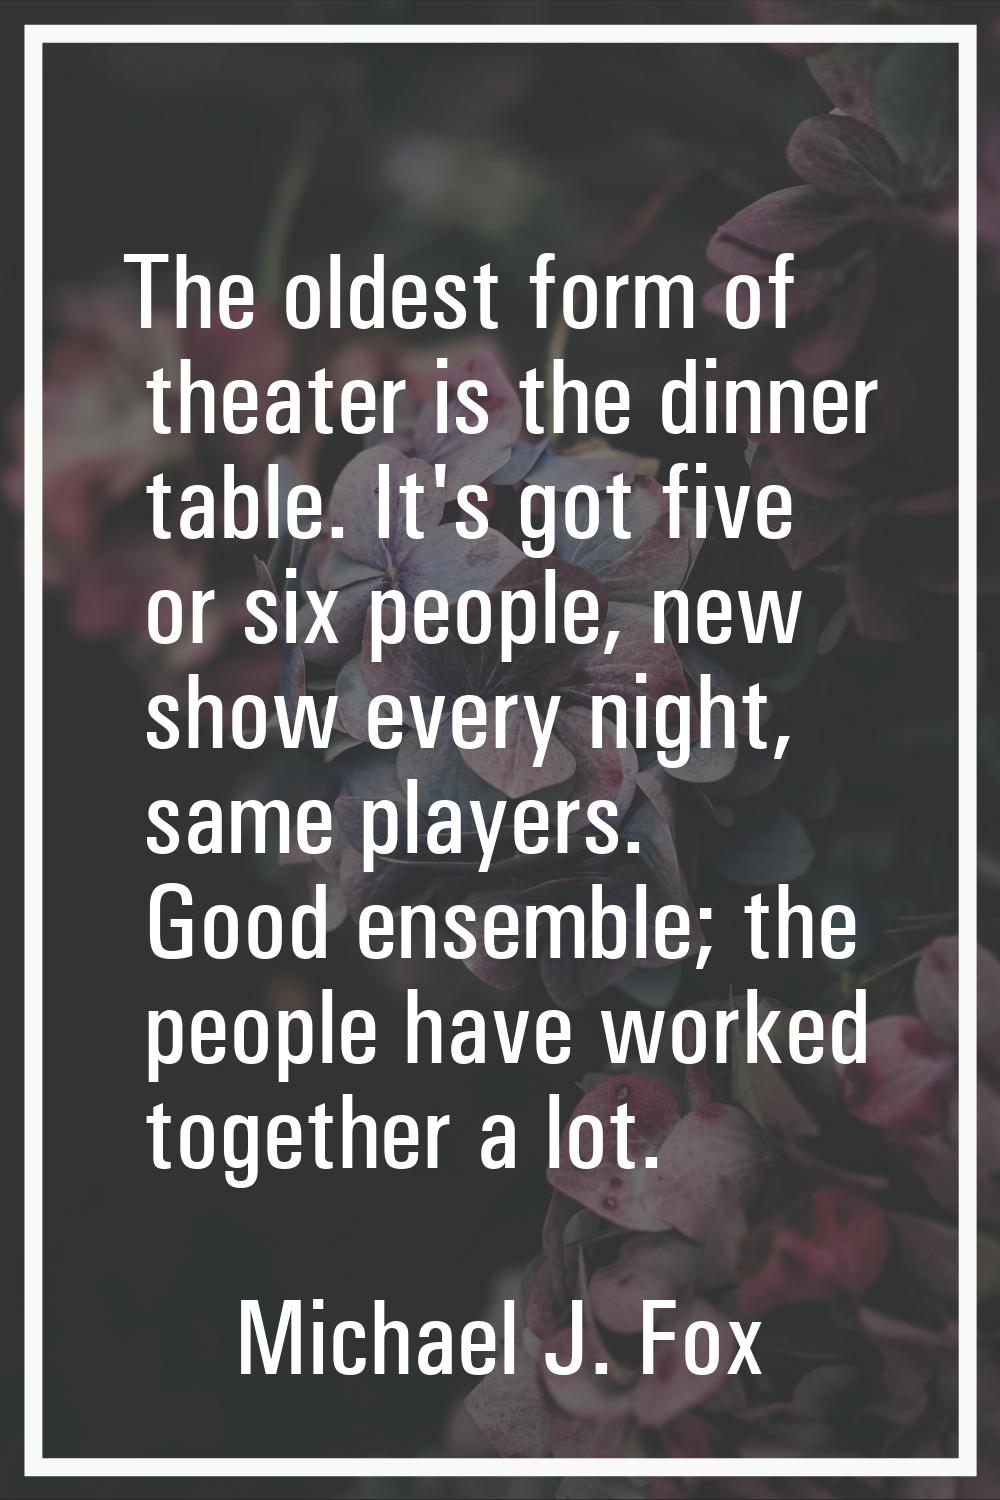 The oldest form of theater is the dinner table. It's got five or six people, new show every night, 